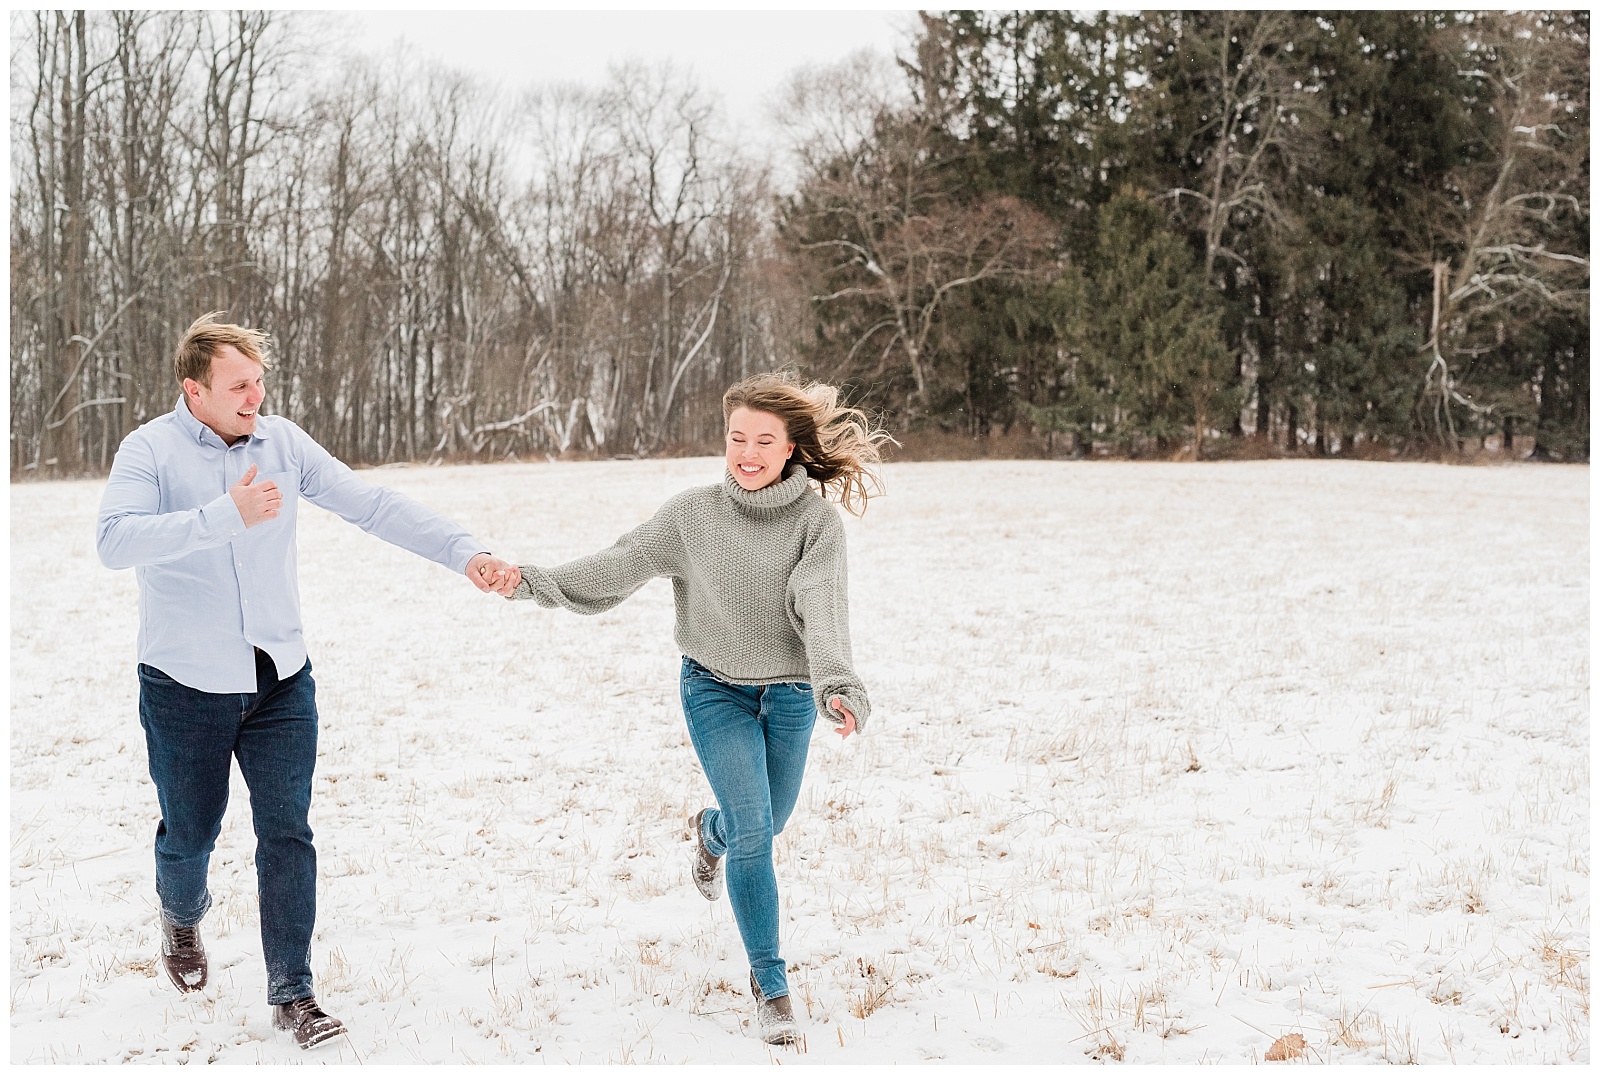 New Jersey Engagement Session, Snowy, Winter, Cozy, Session, Wedding Photographer, Cross Estate Gardens, Snow, Wintry, Light and Airy, Wild, Free, Run